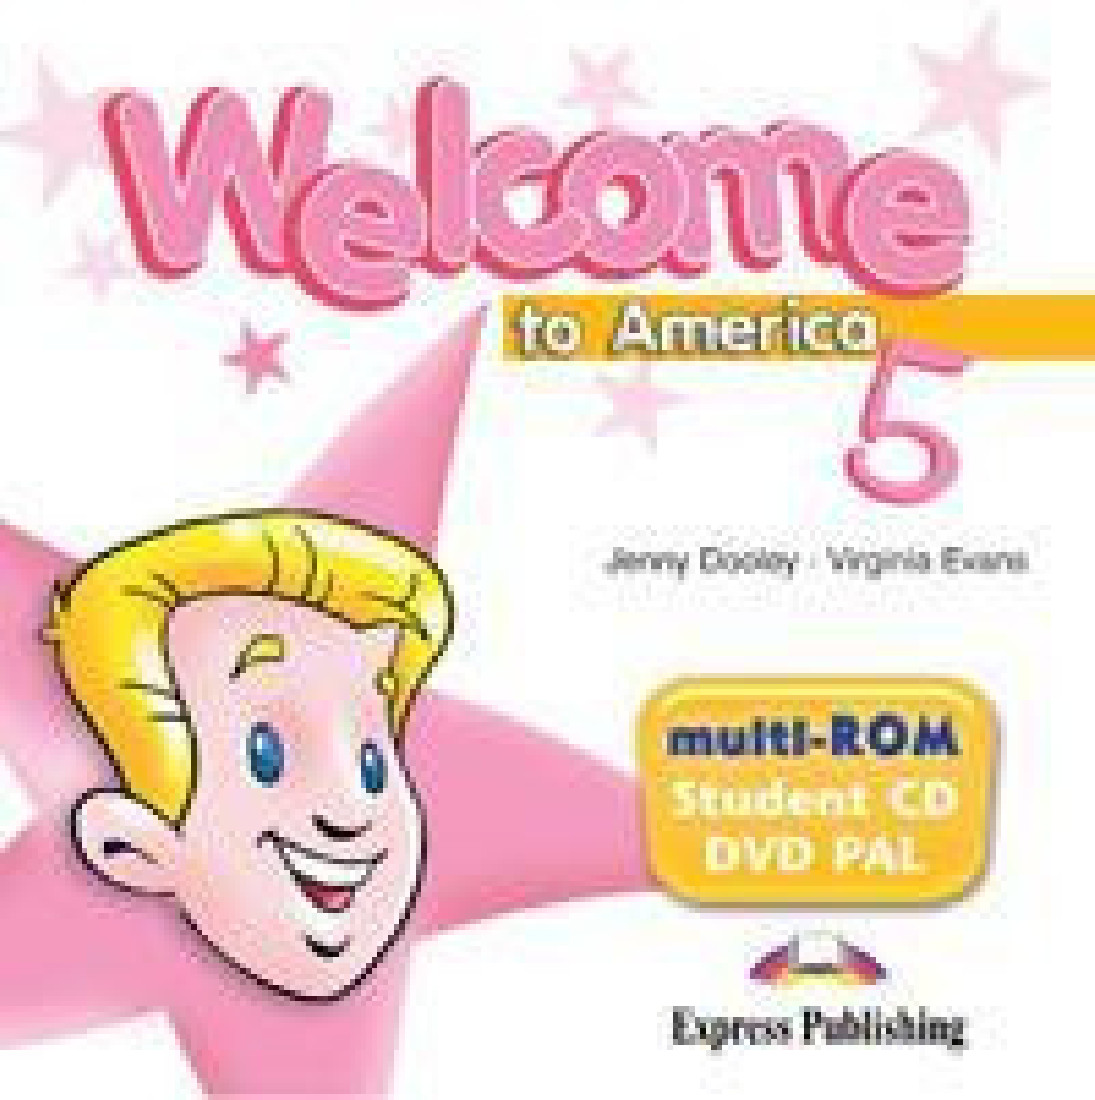 WELCOME TO AMERICA 5 MULTI-ROM